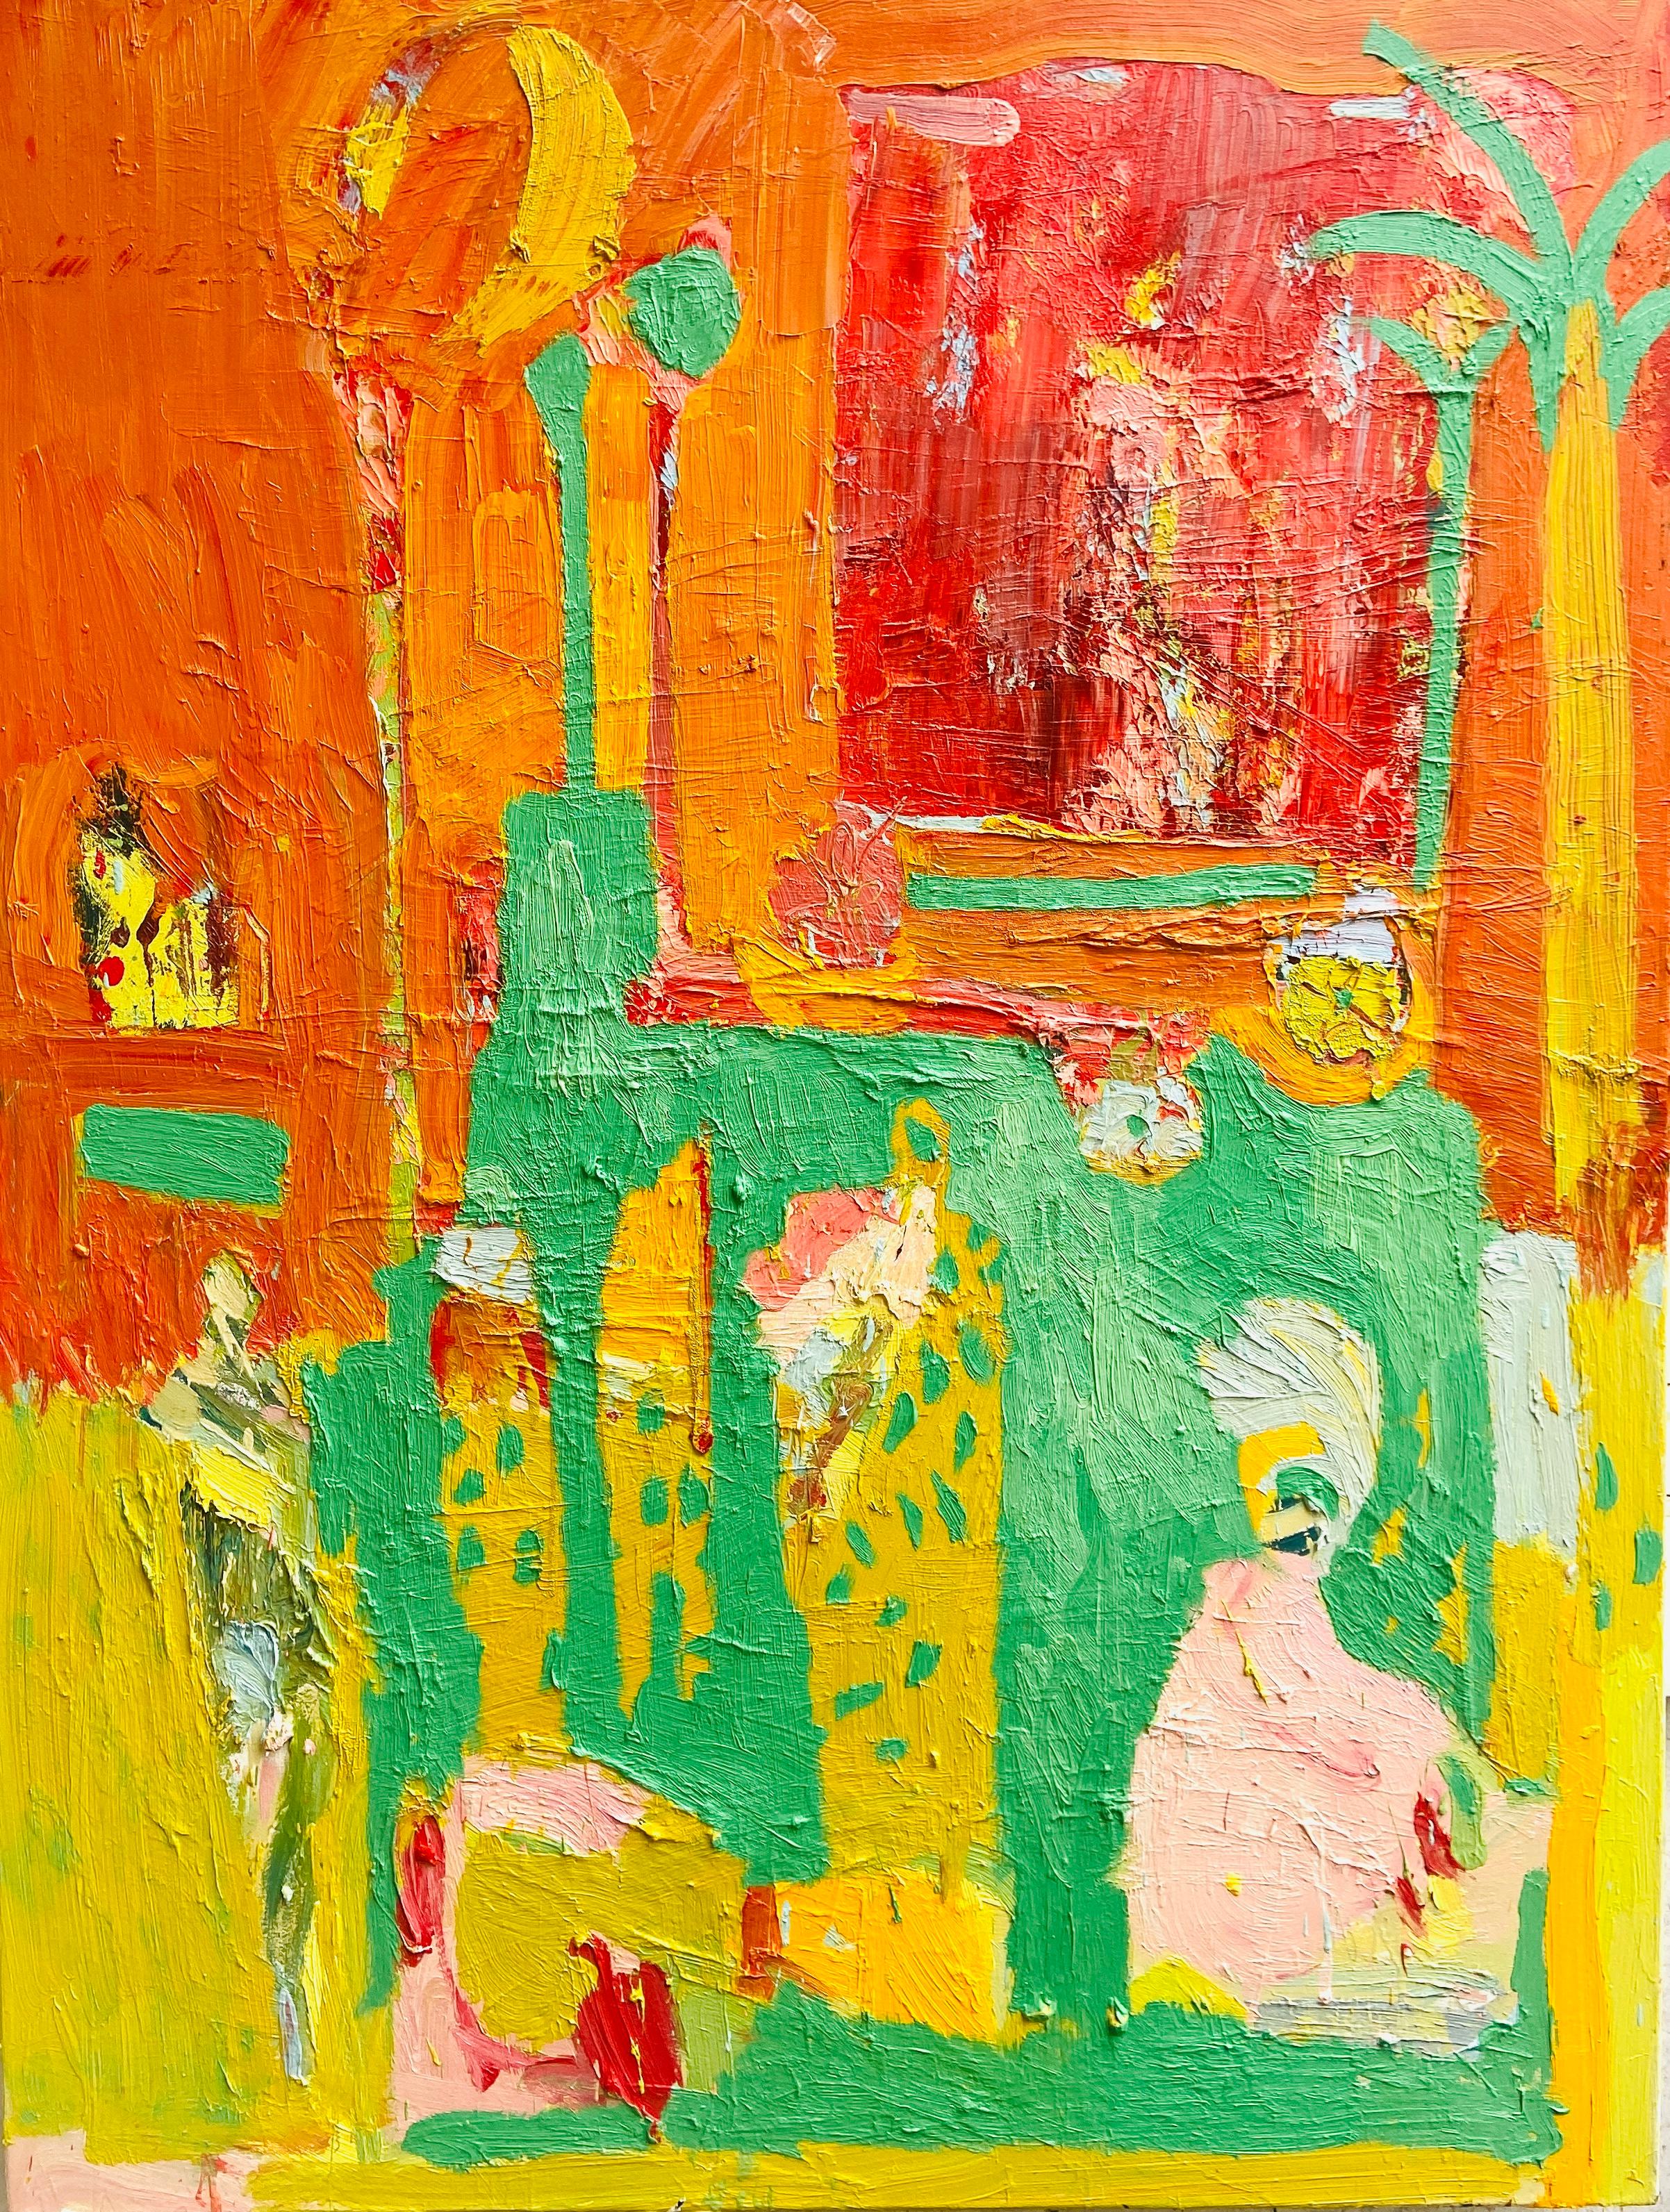 Paul wadsworth Figurative Painting - Orange Garden: Contemporary Abstract Expressionist Oil Painting